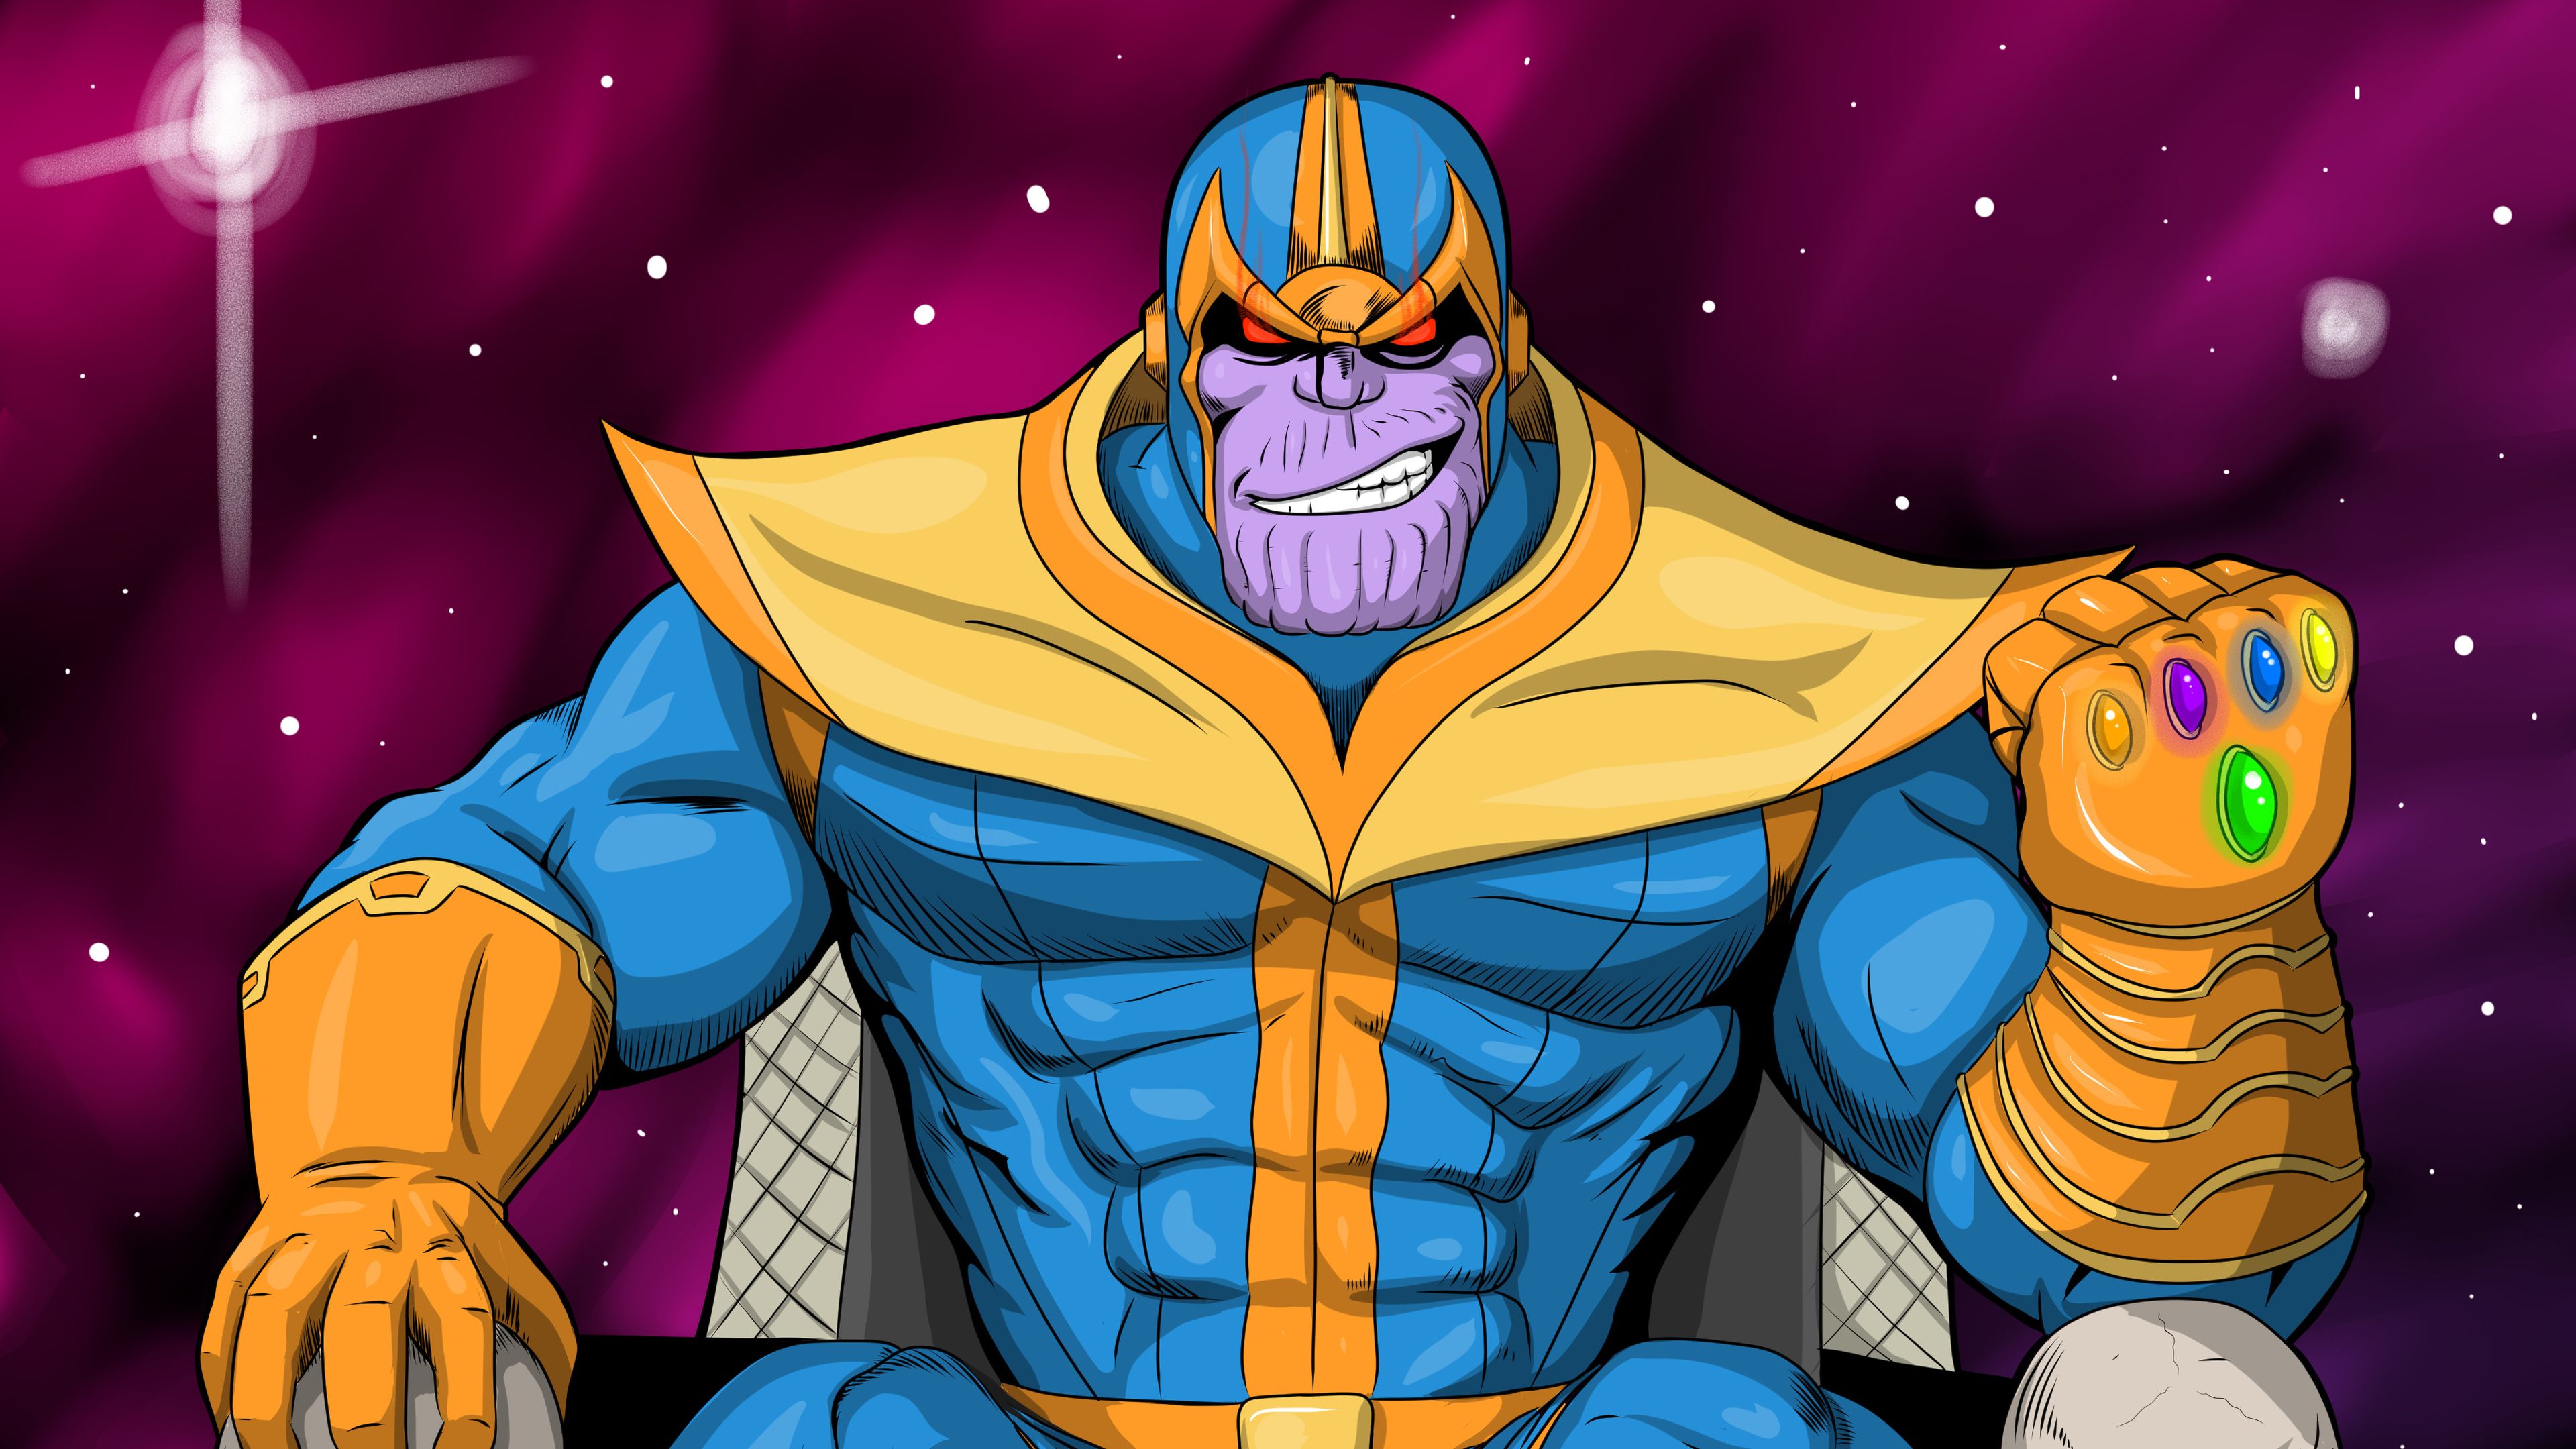 Thanos Artistic Wallpapers